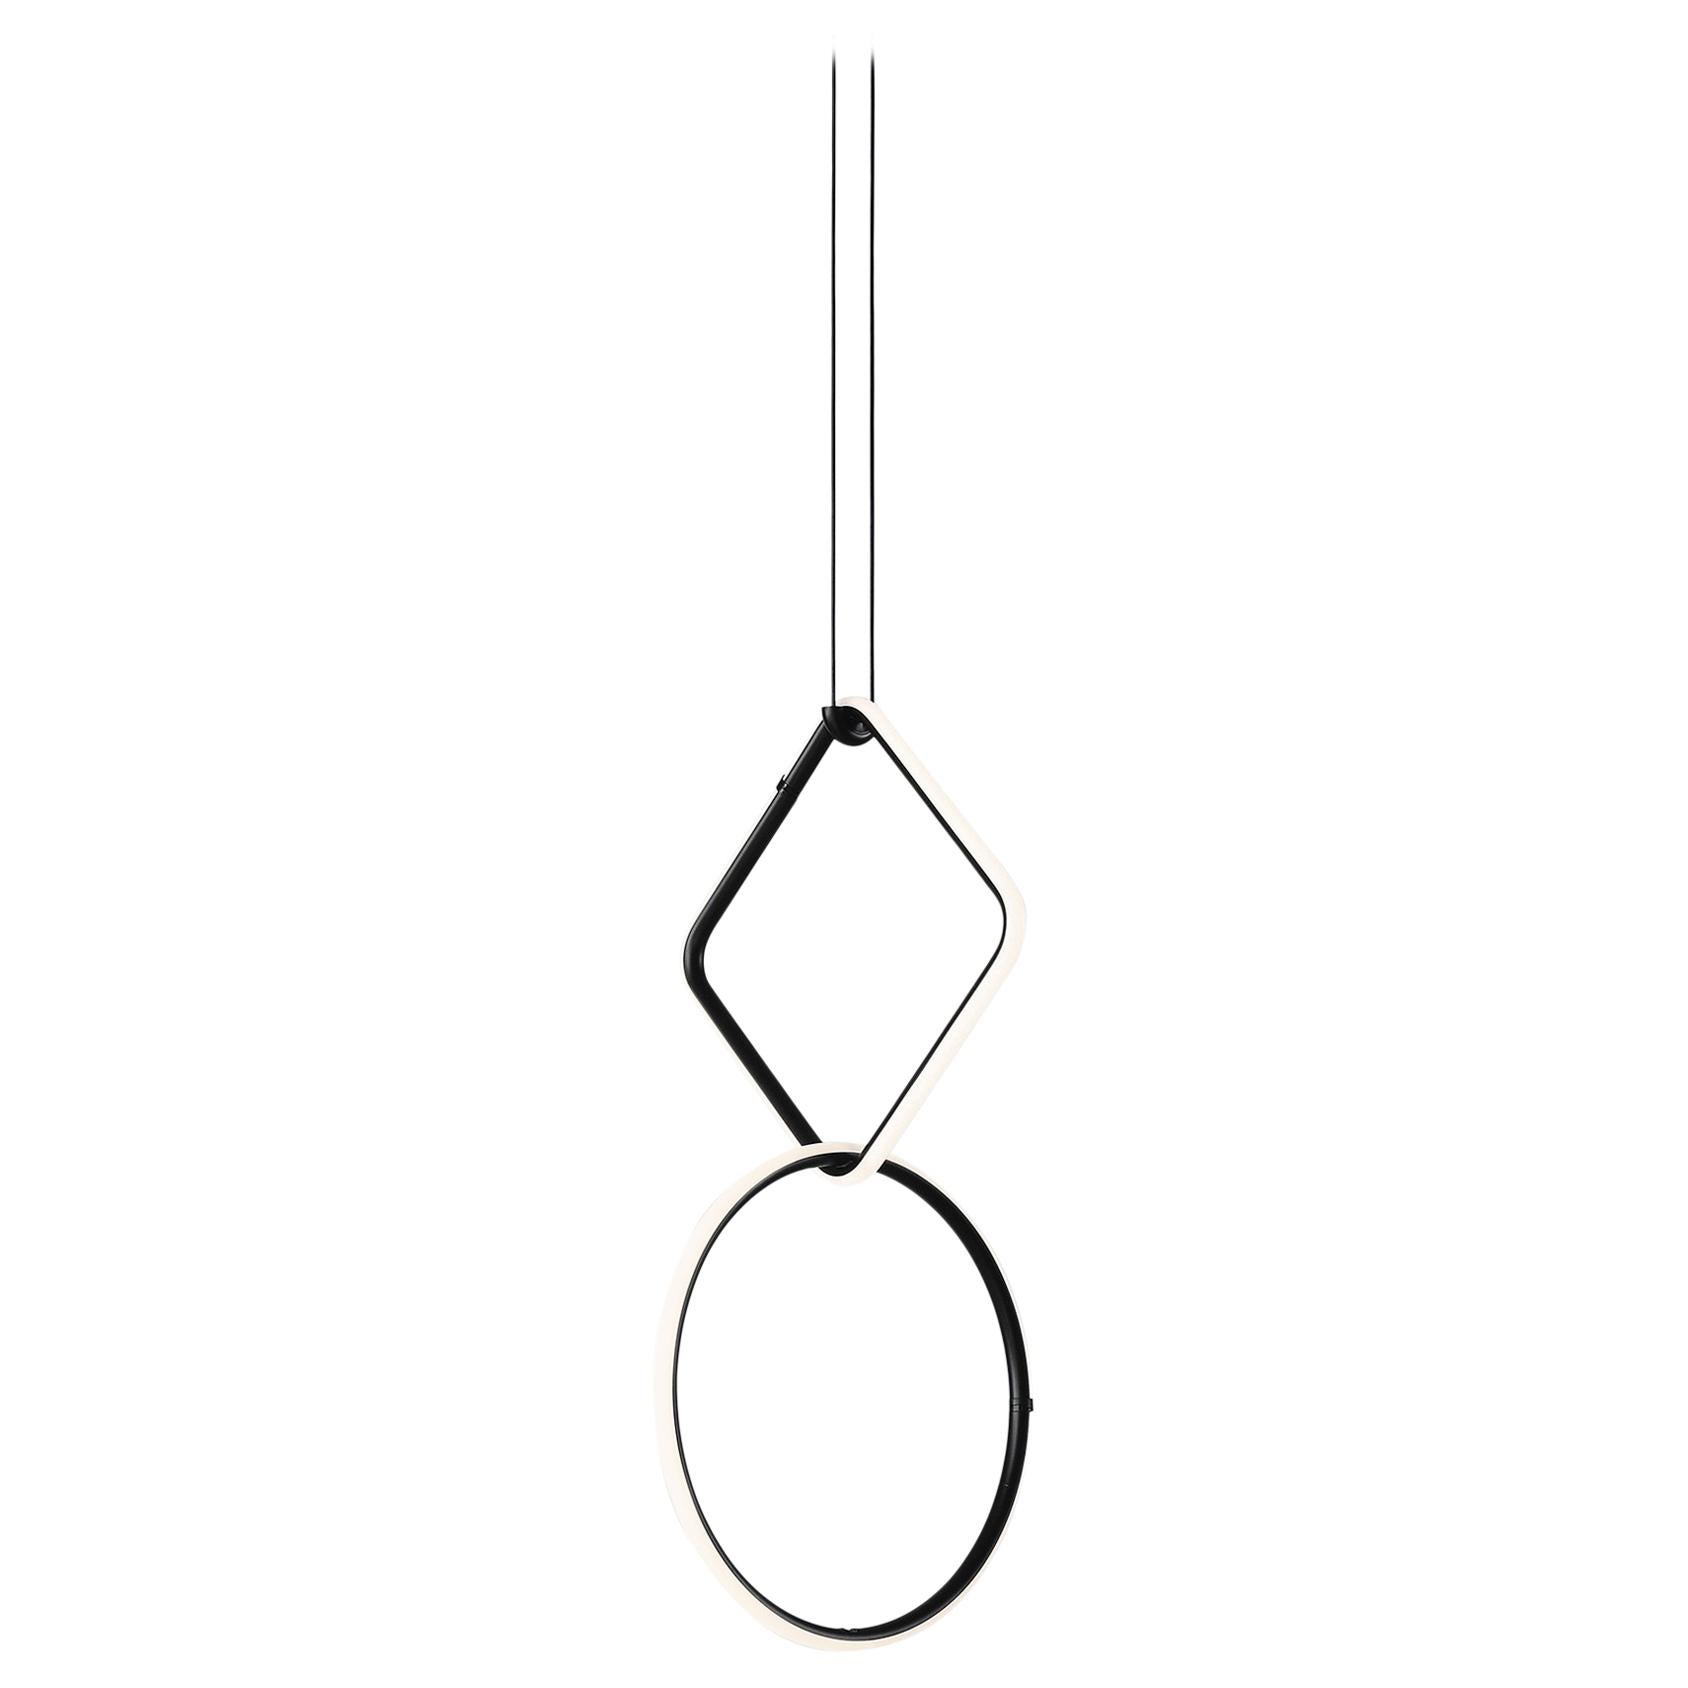 FLOS Small Square and Circle Arrangements Light by Michael Anastassiades For Sale